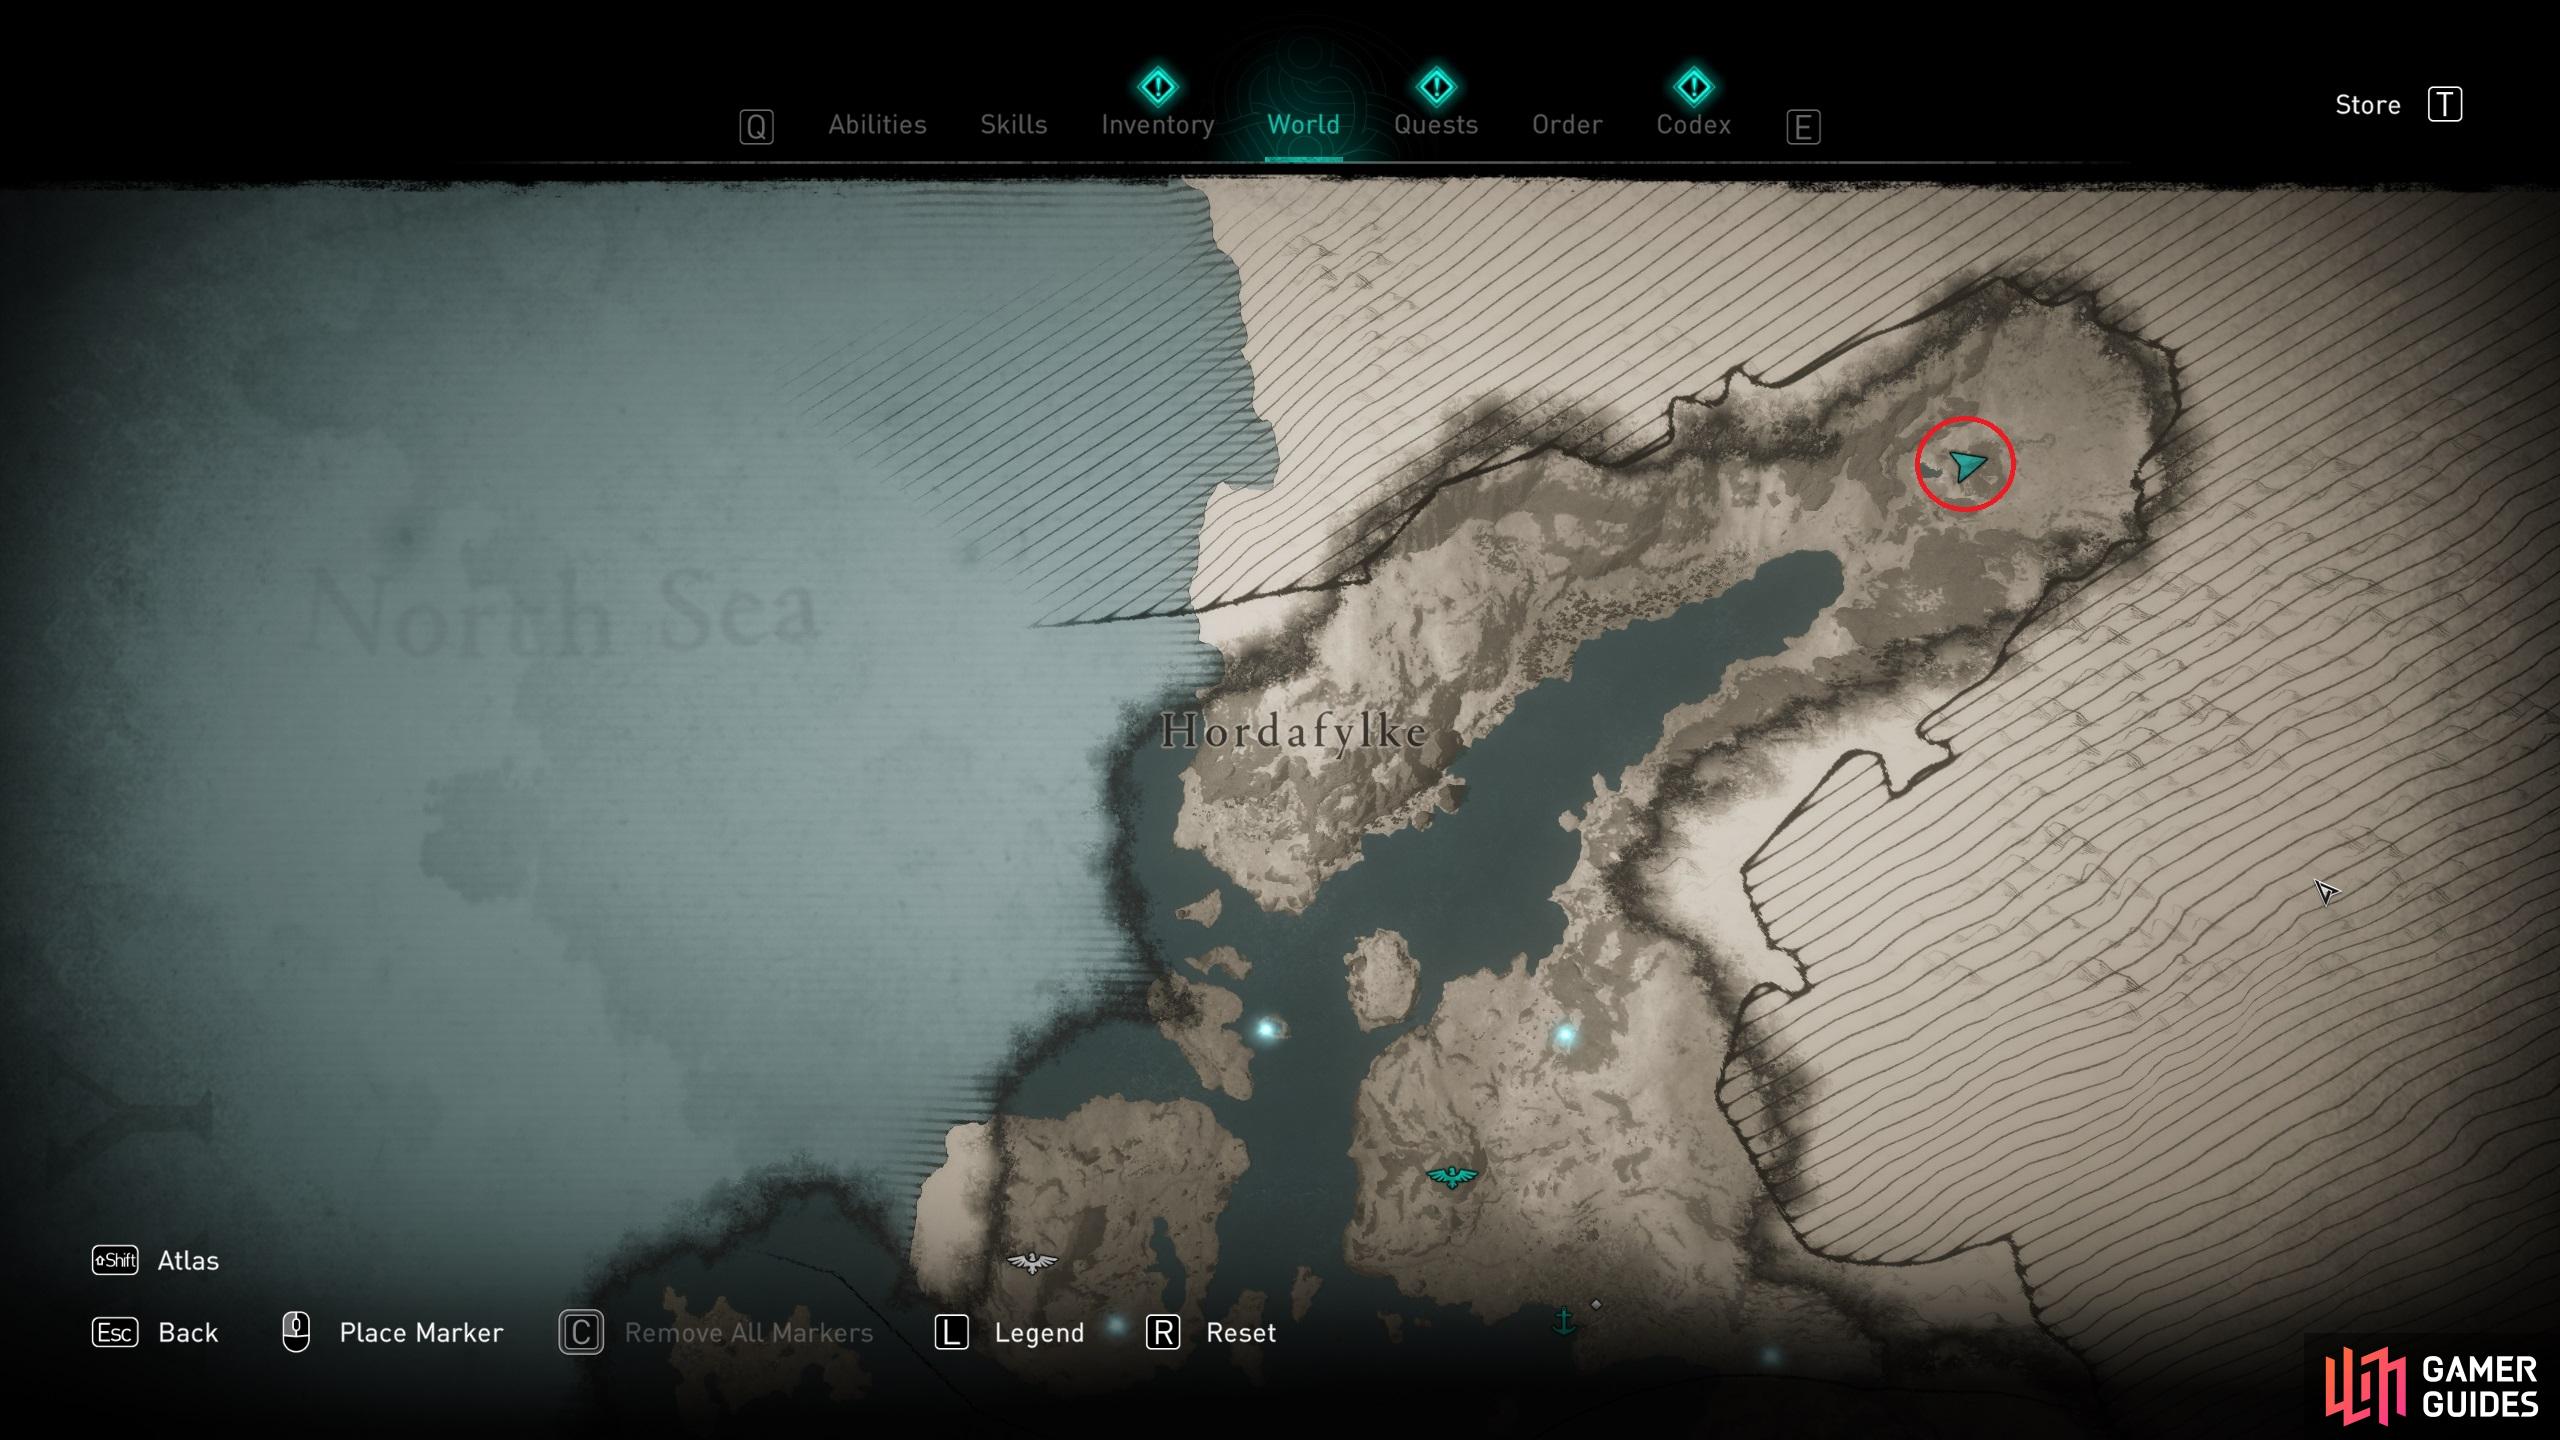 The location of Goinnhellir, the cave in the northeast of Hordafylke where Odins Spear, Gungnir, can be found.